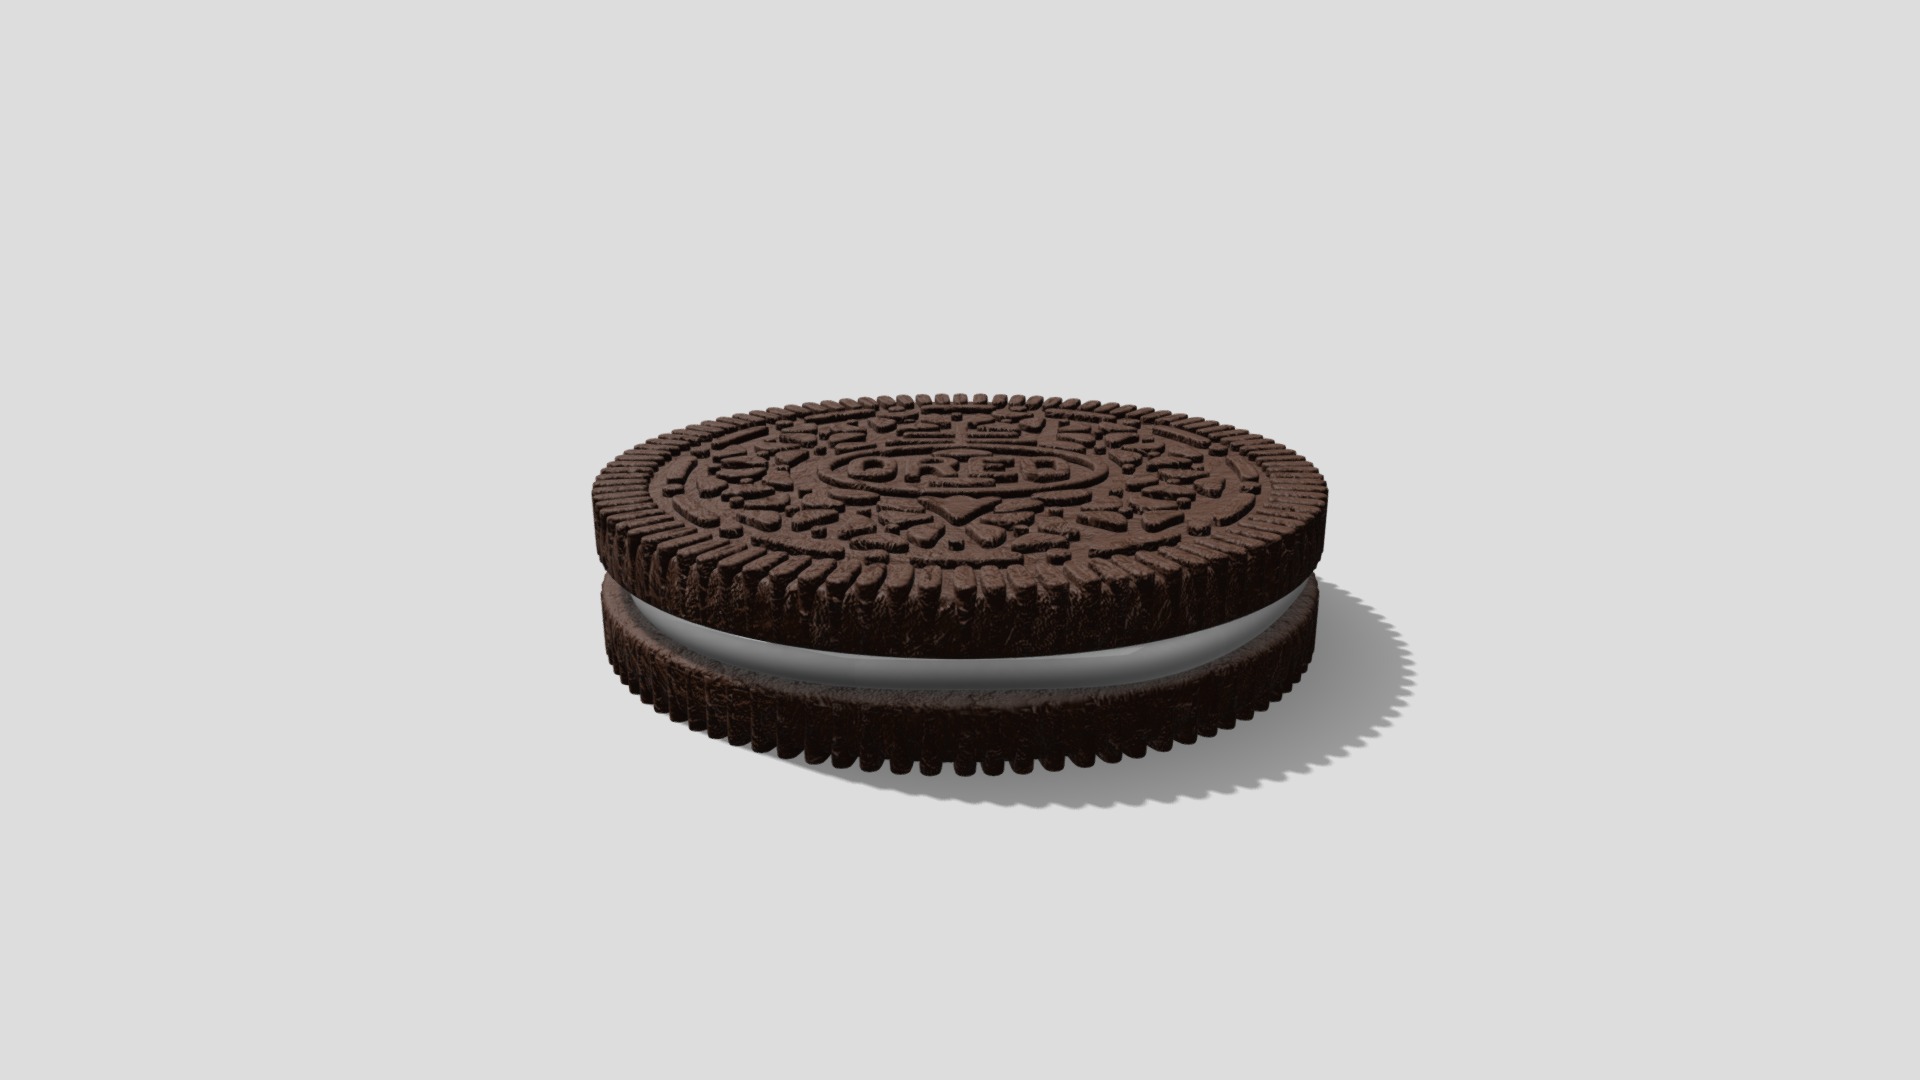 3D model Oreo Sketchfab - This is a 3D model of the Oreo Sketchfab. The 3D model is about a stack of coins.